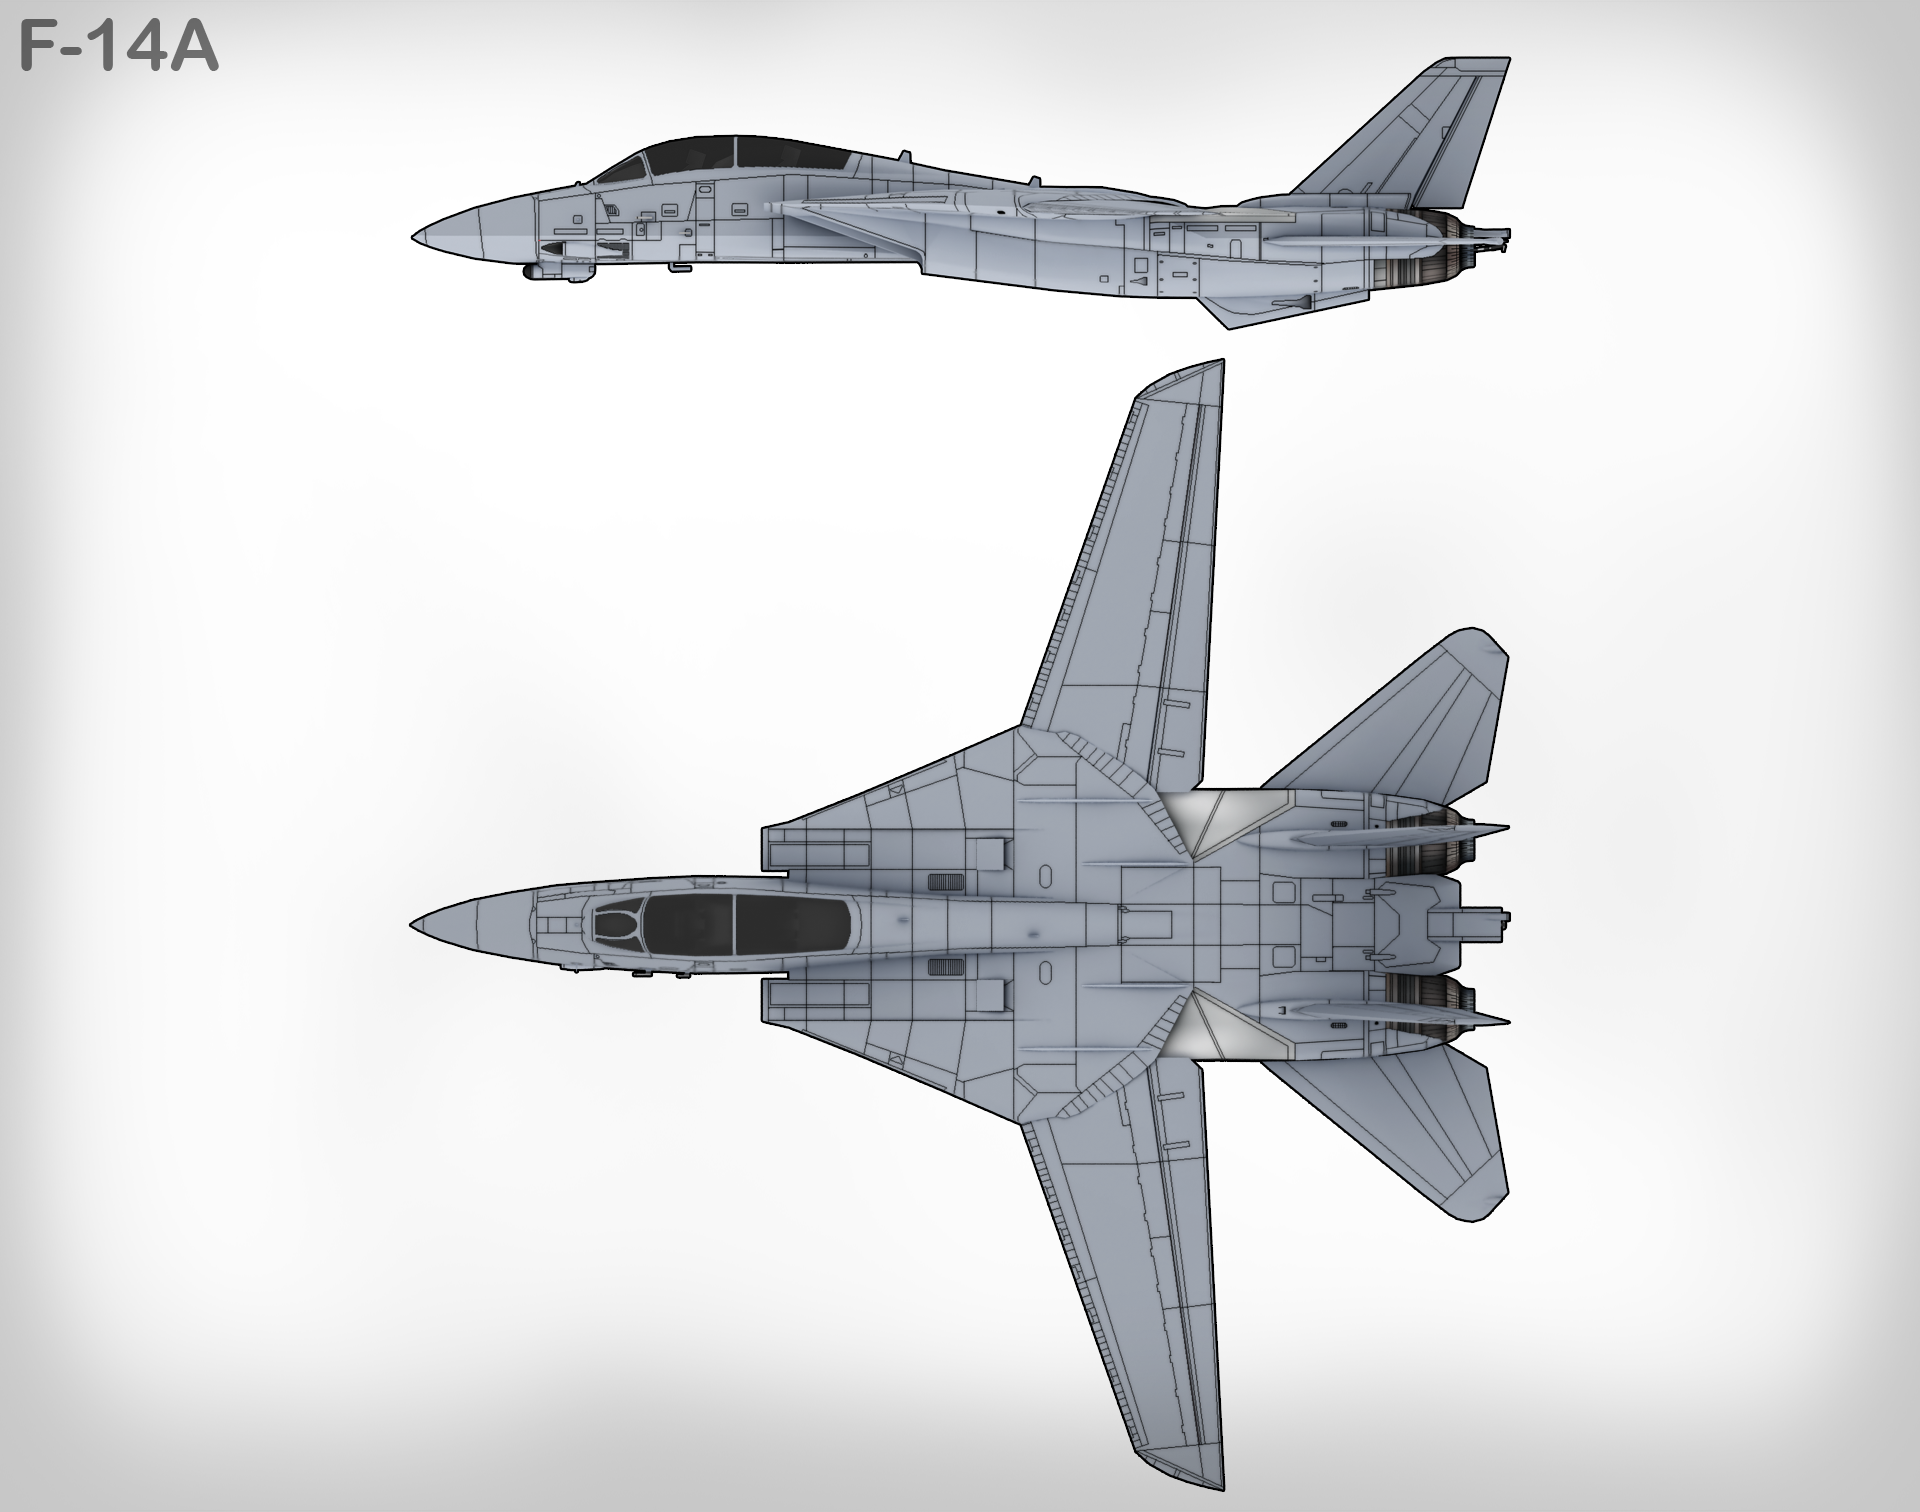 The F-14B also known as Bombcat is an upgraded version of the F-14A which f...